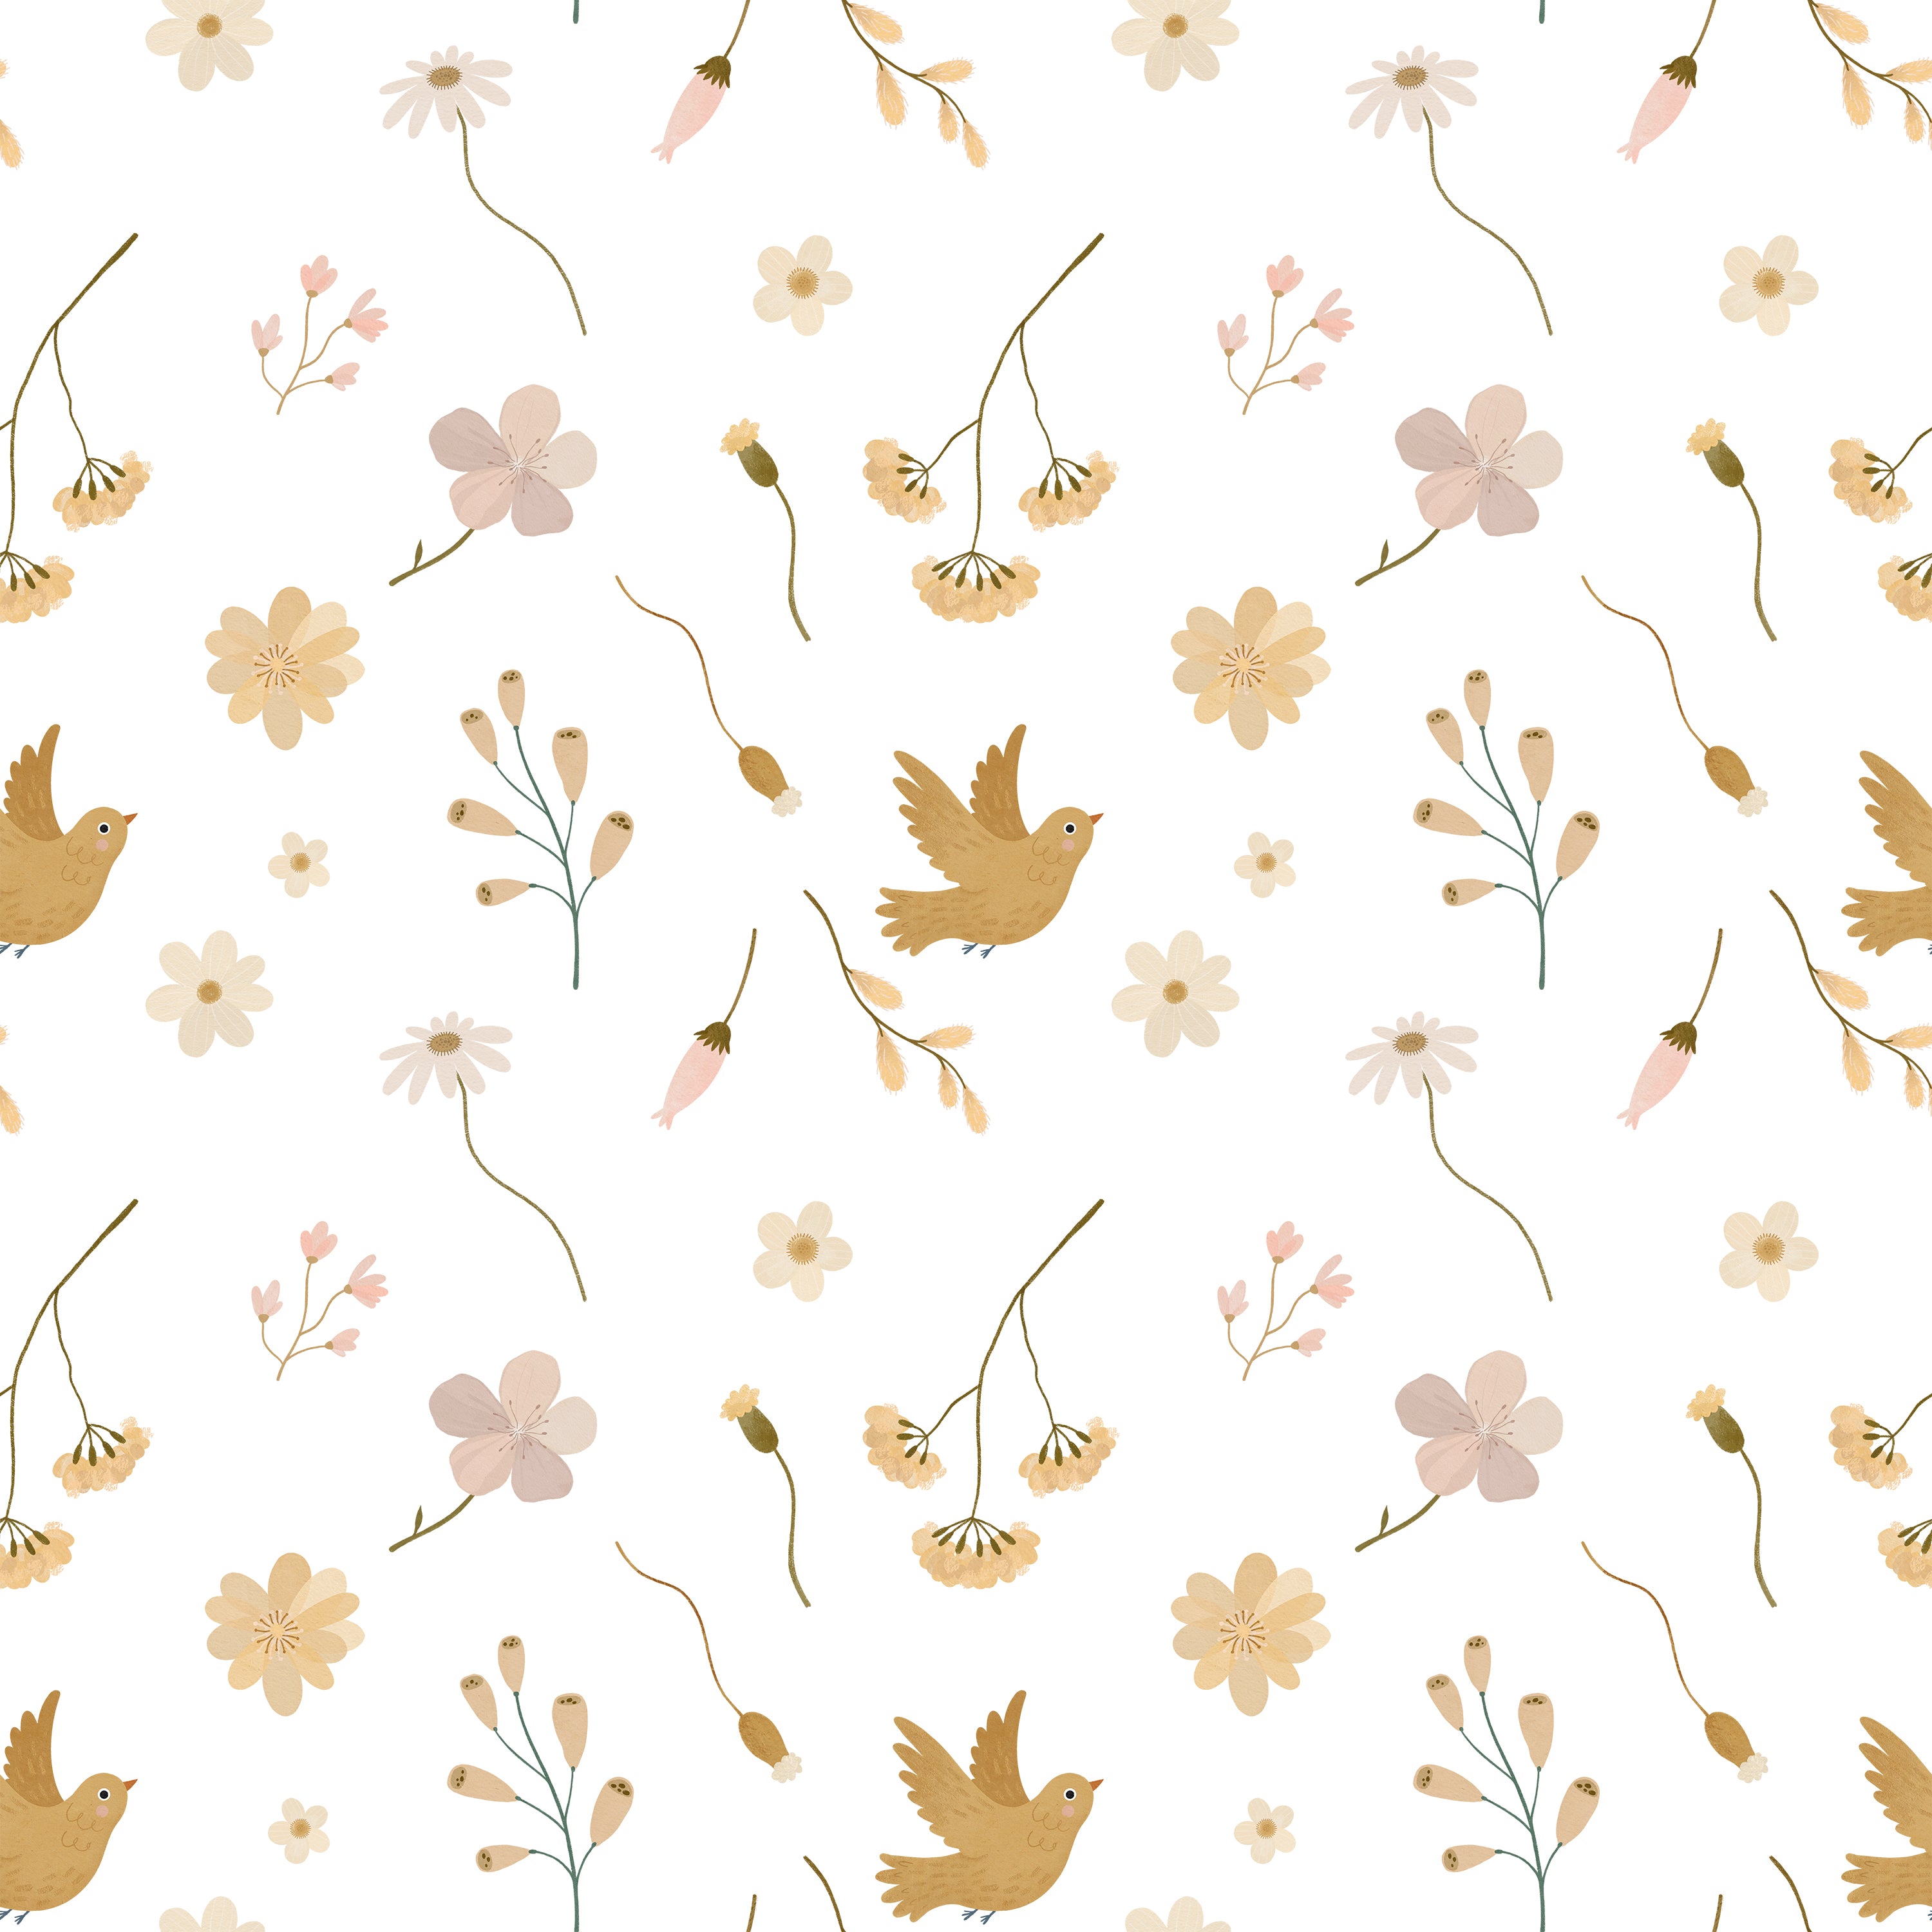 A close-up view of the Pastel and Paradise Wallpaper, showcasing a delicate design of golden birds and pale flowers scattered across a white background, creating a serene and inviting pattern.